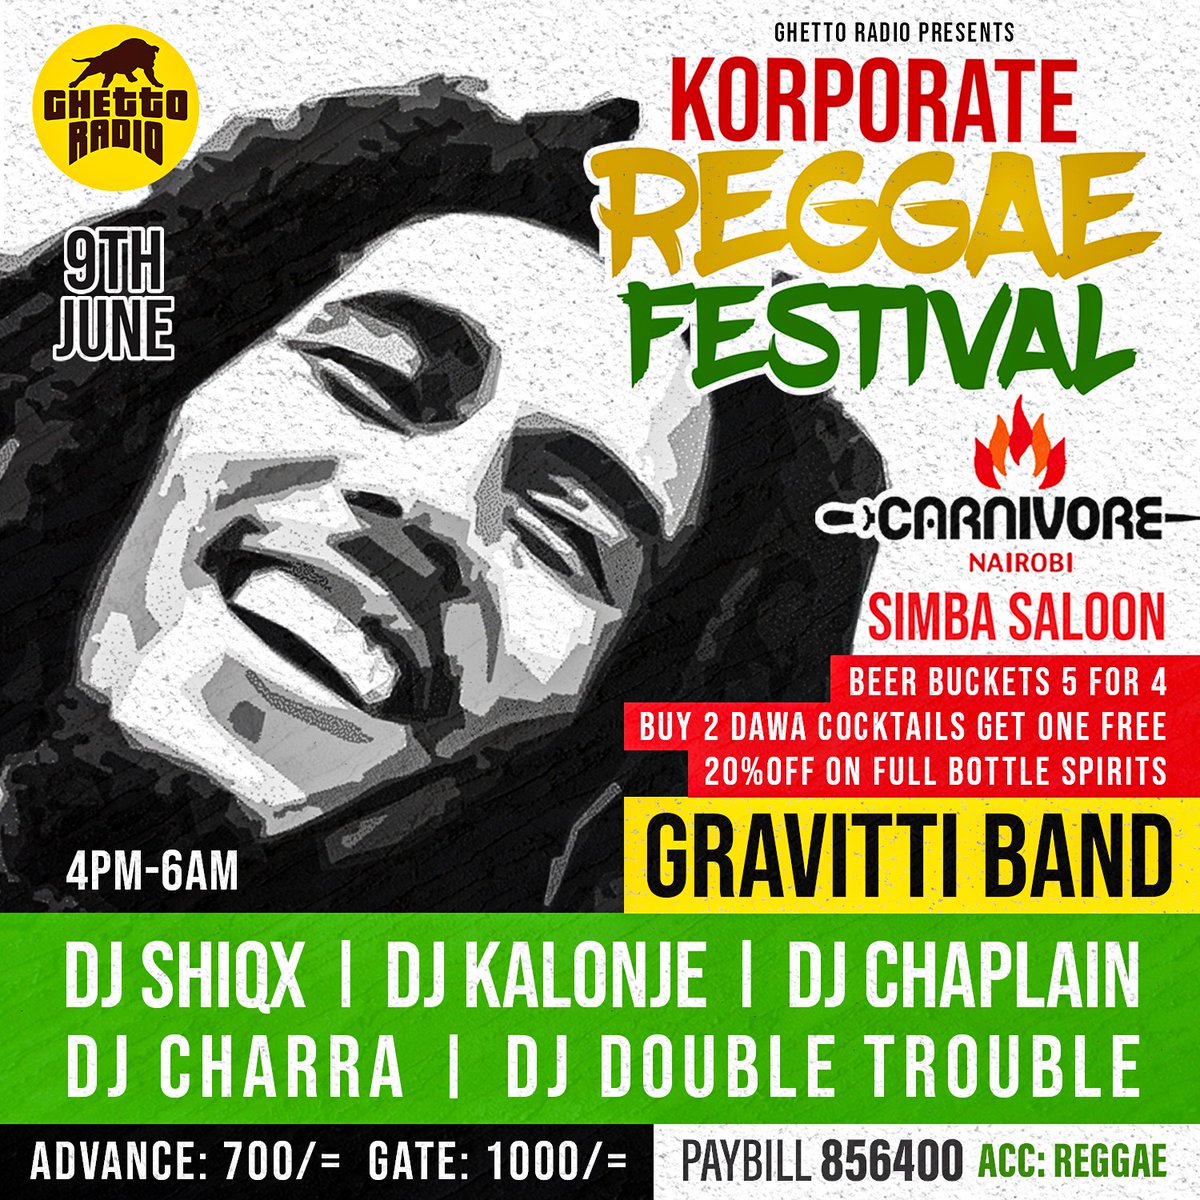 'I believe music is like medicine. Like a good tonic, it can open your mind & cure. Nothing I know of has the healing force that exists in Music.' - Burning Spear TOKEA @CarnivoreKe This FURAHI-DAY TUPIGE SHEREHE NA #KorporateReggae💥 Grab your Advance Tickets NOW!🔥